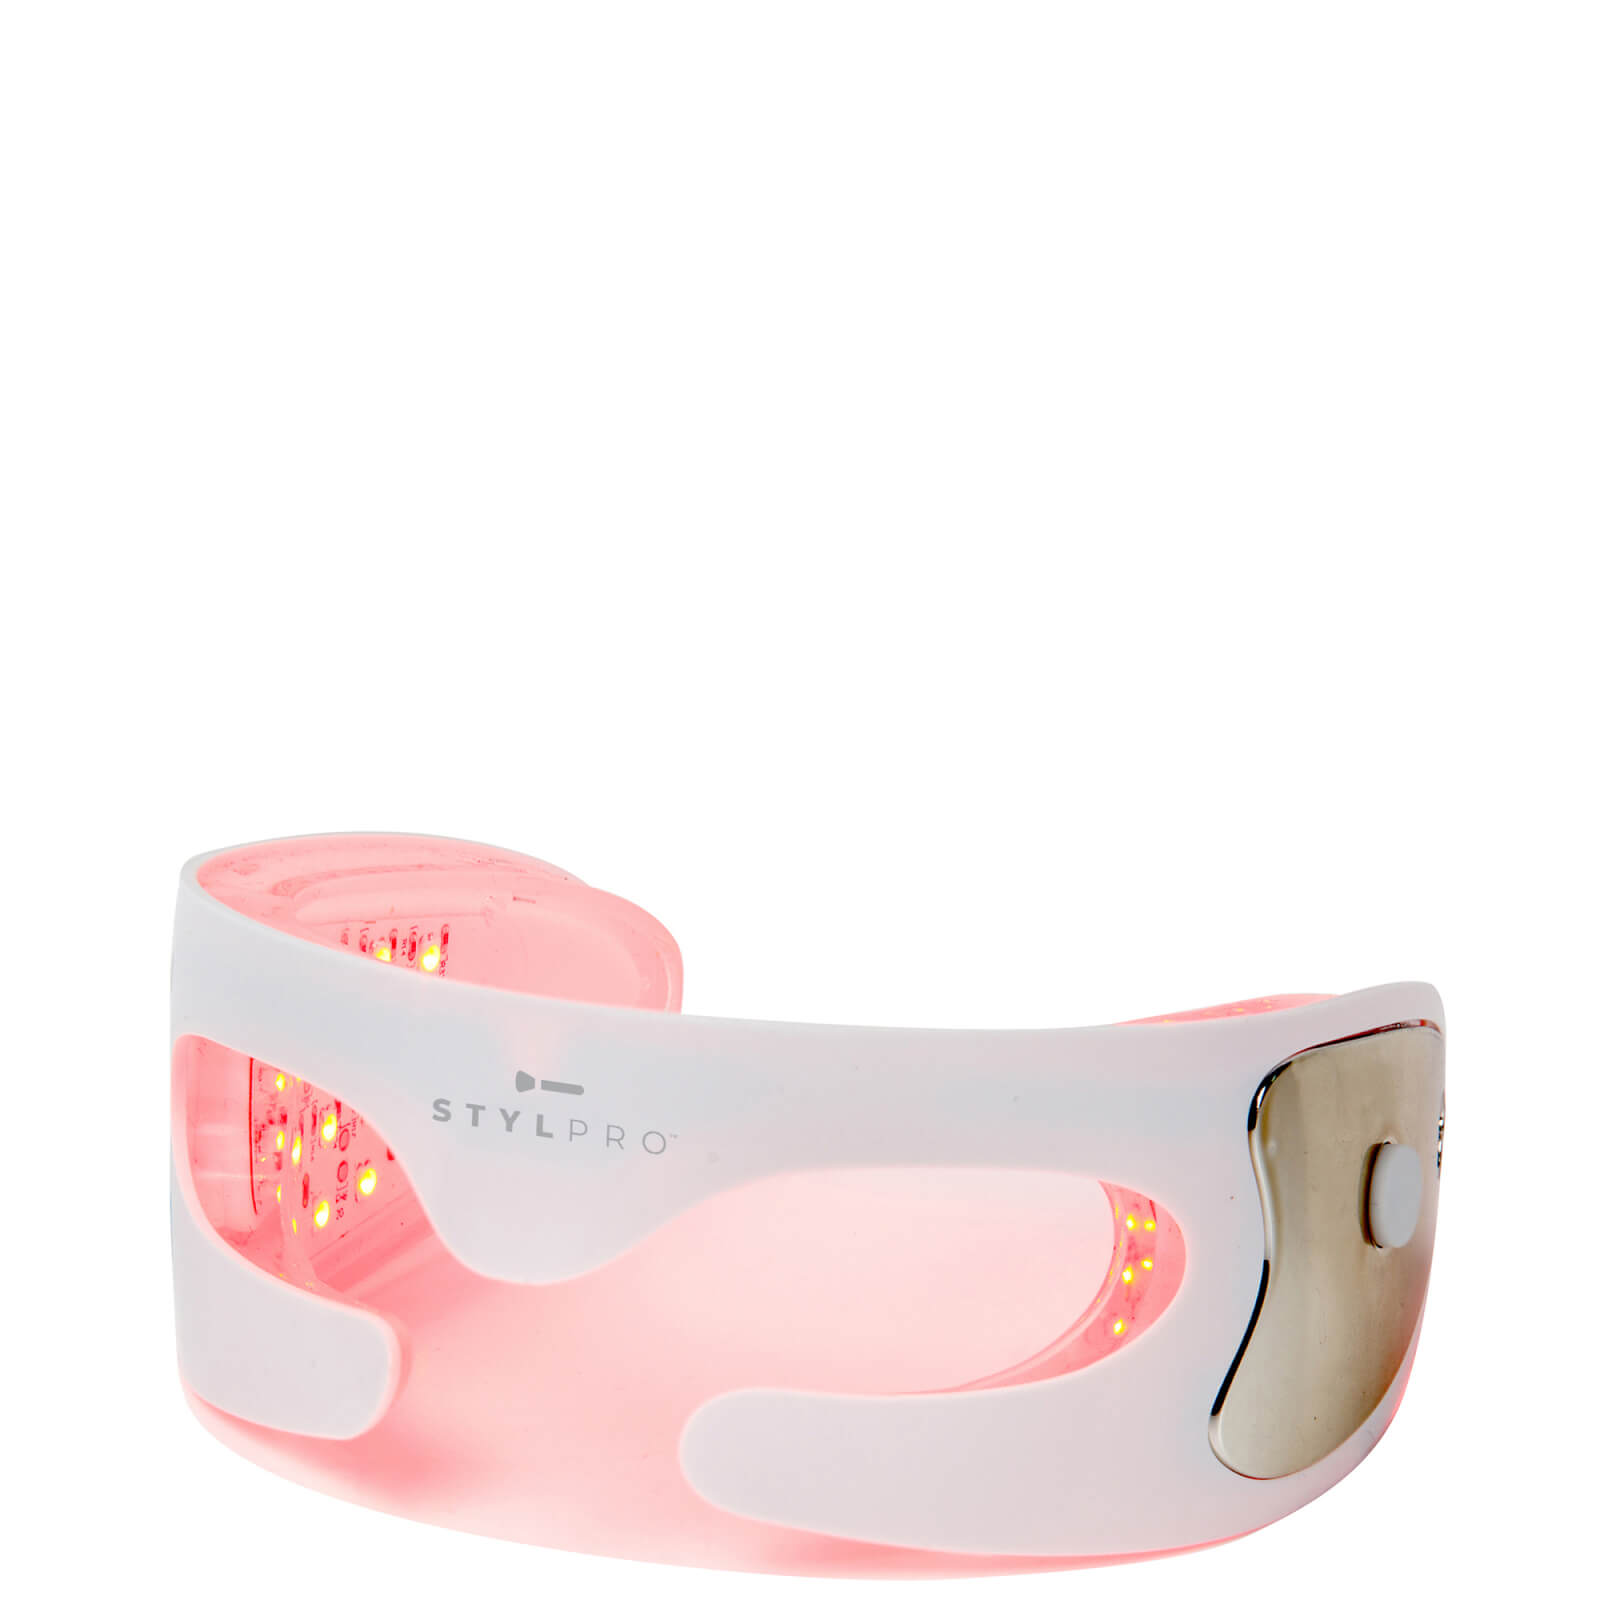 Stylpro Radiant Eyes Red Led Light Goggles In White